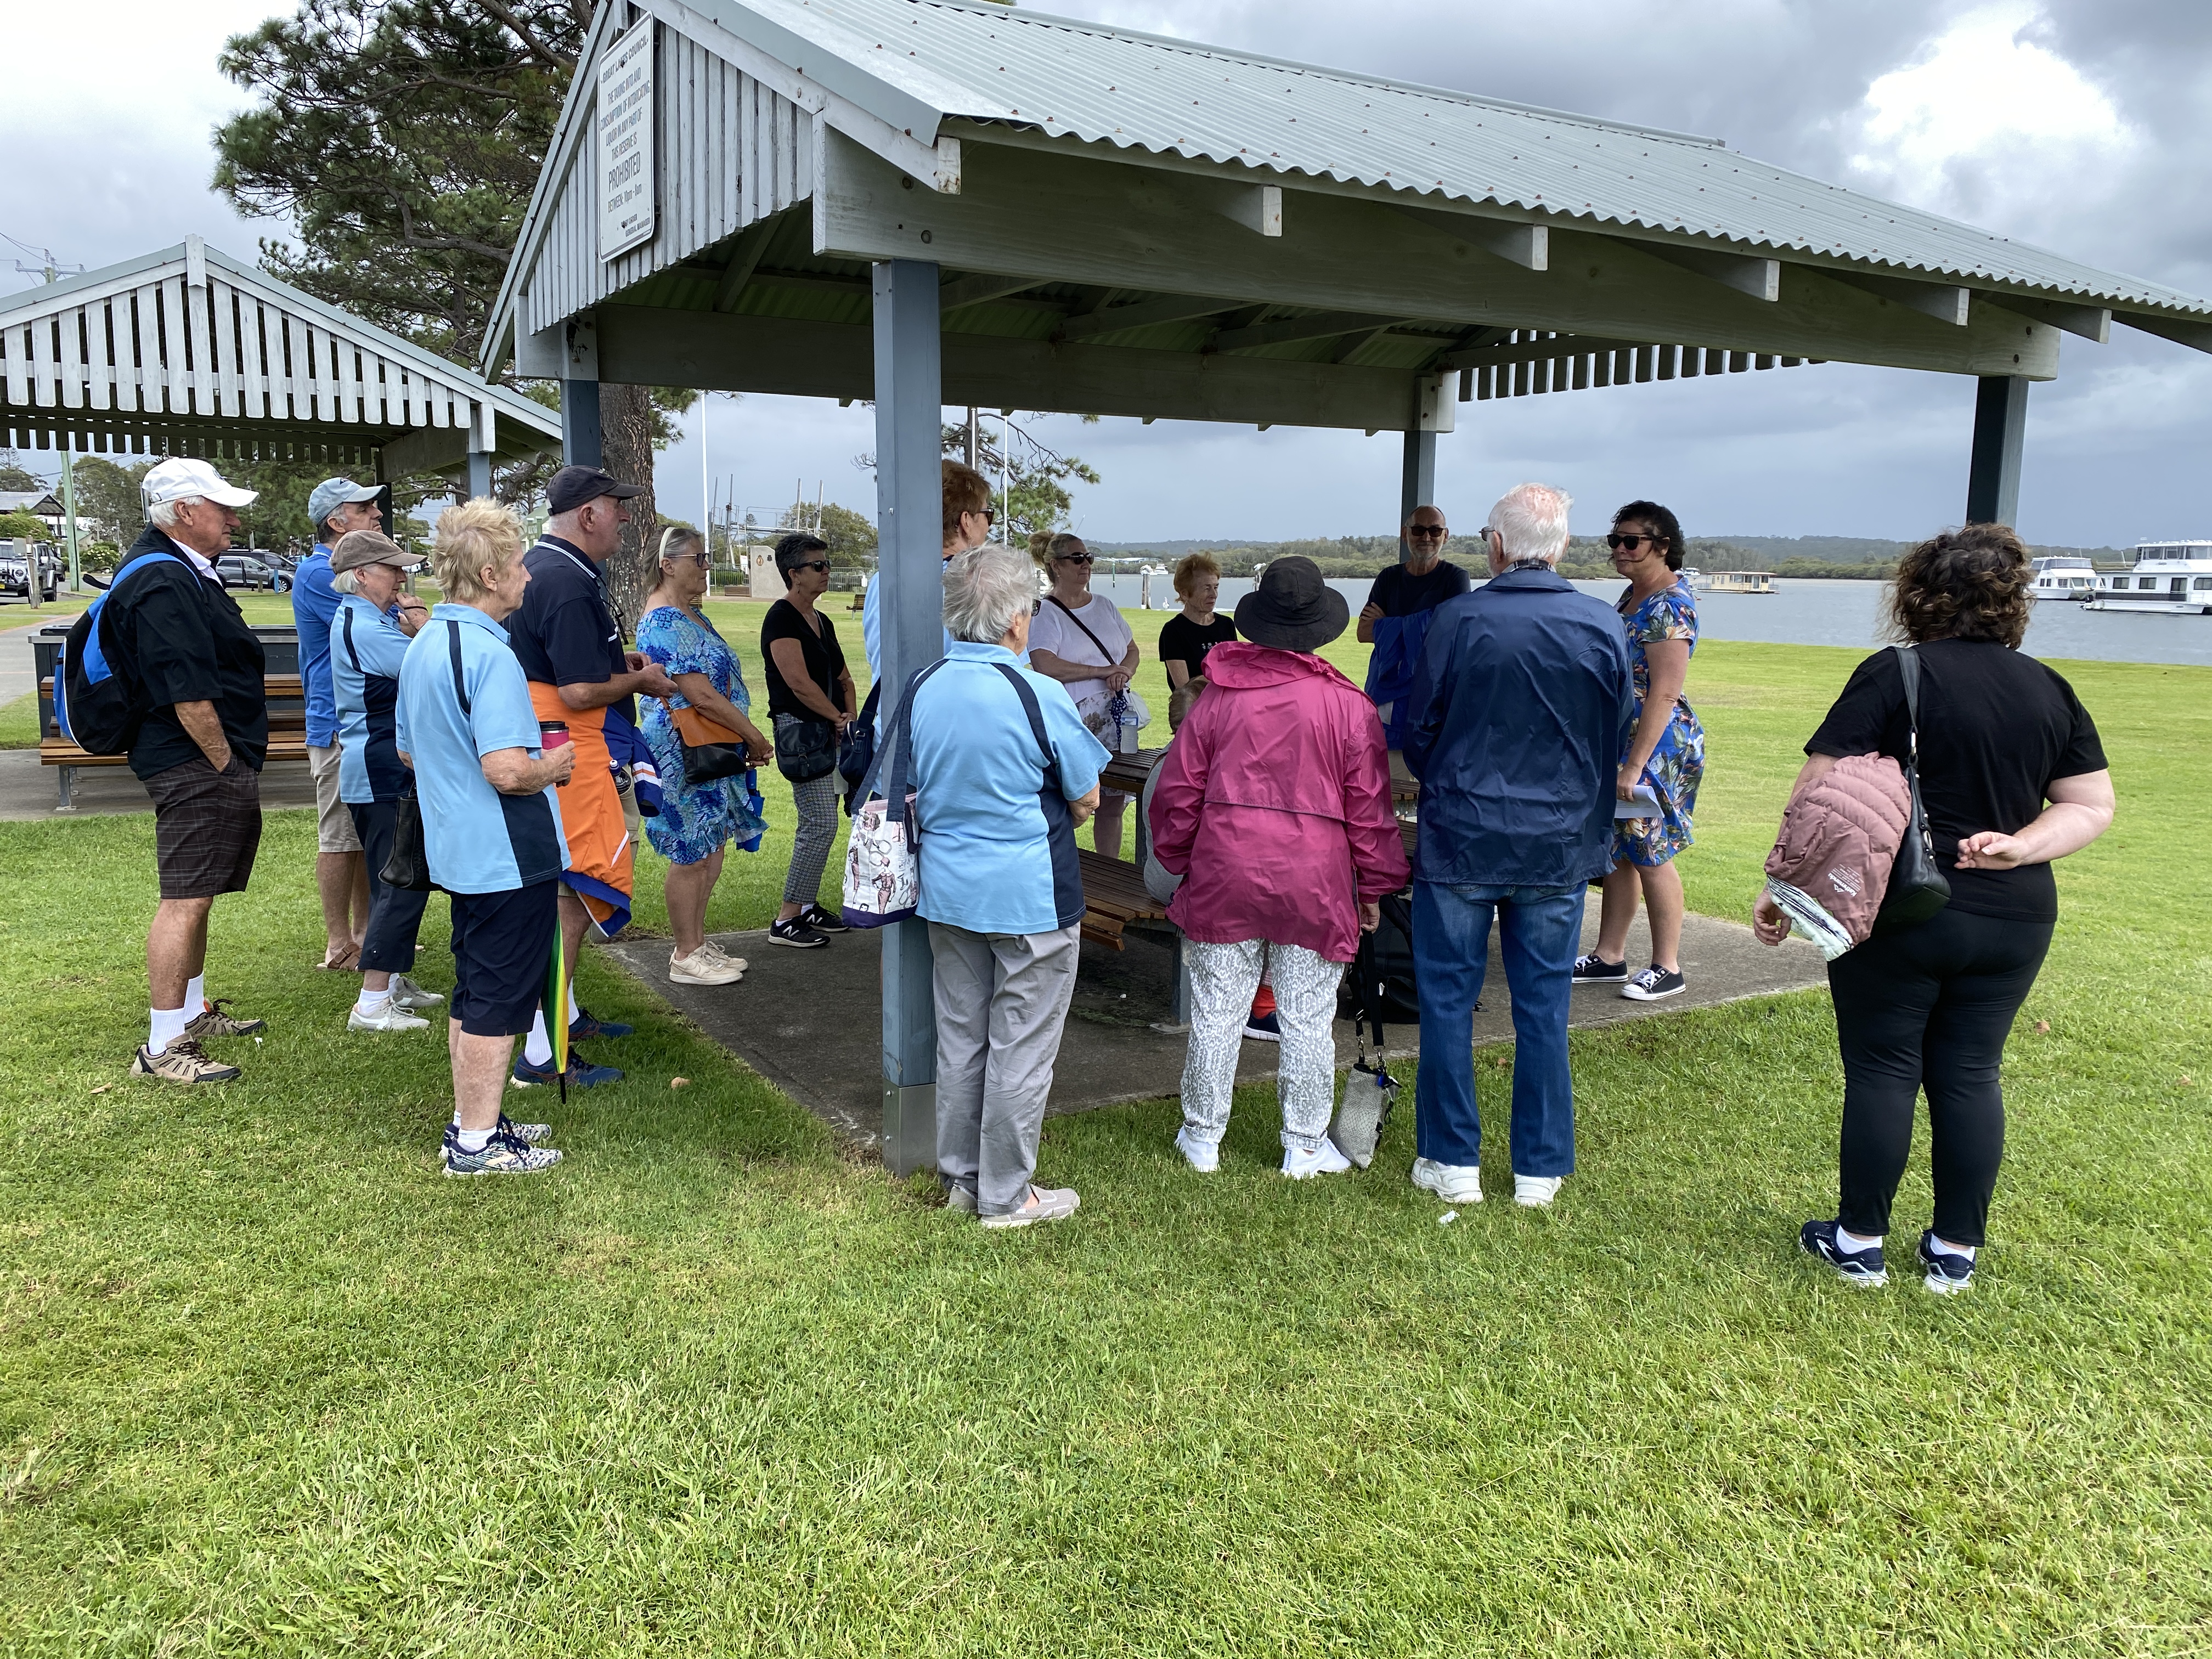 Janine Roberts on behalf of 'Midcoast Stories' taking some Seniors on a heritage walk along the waterfront at Tea Gardens for 'Seniors Week' organised by MidCoast Council.